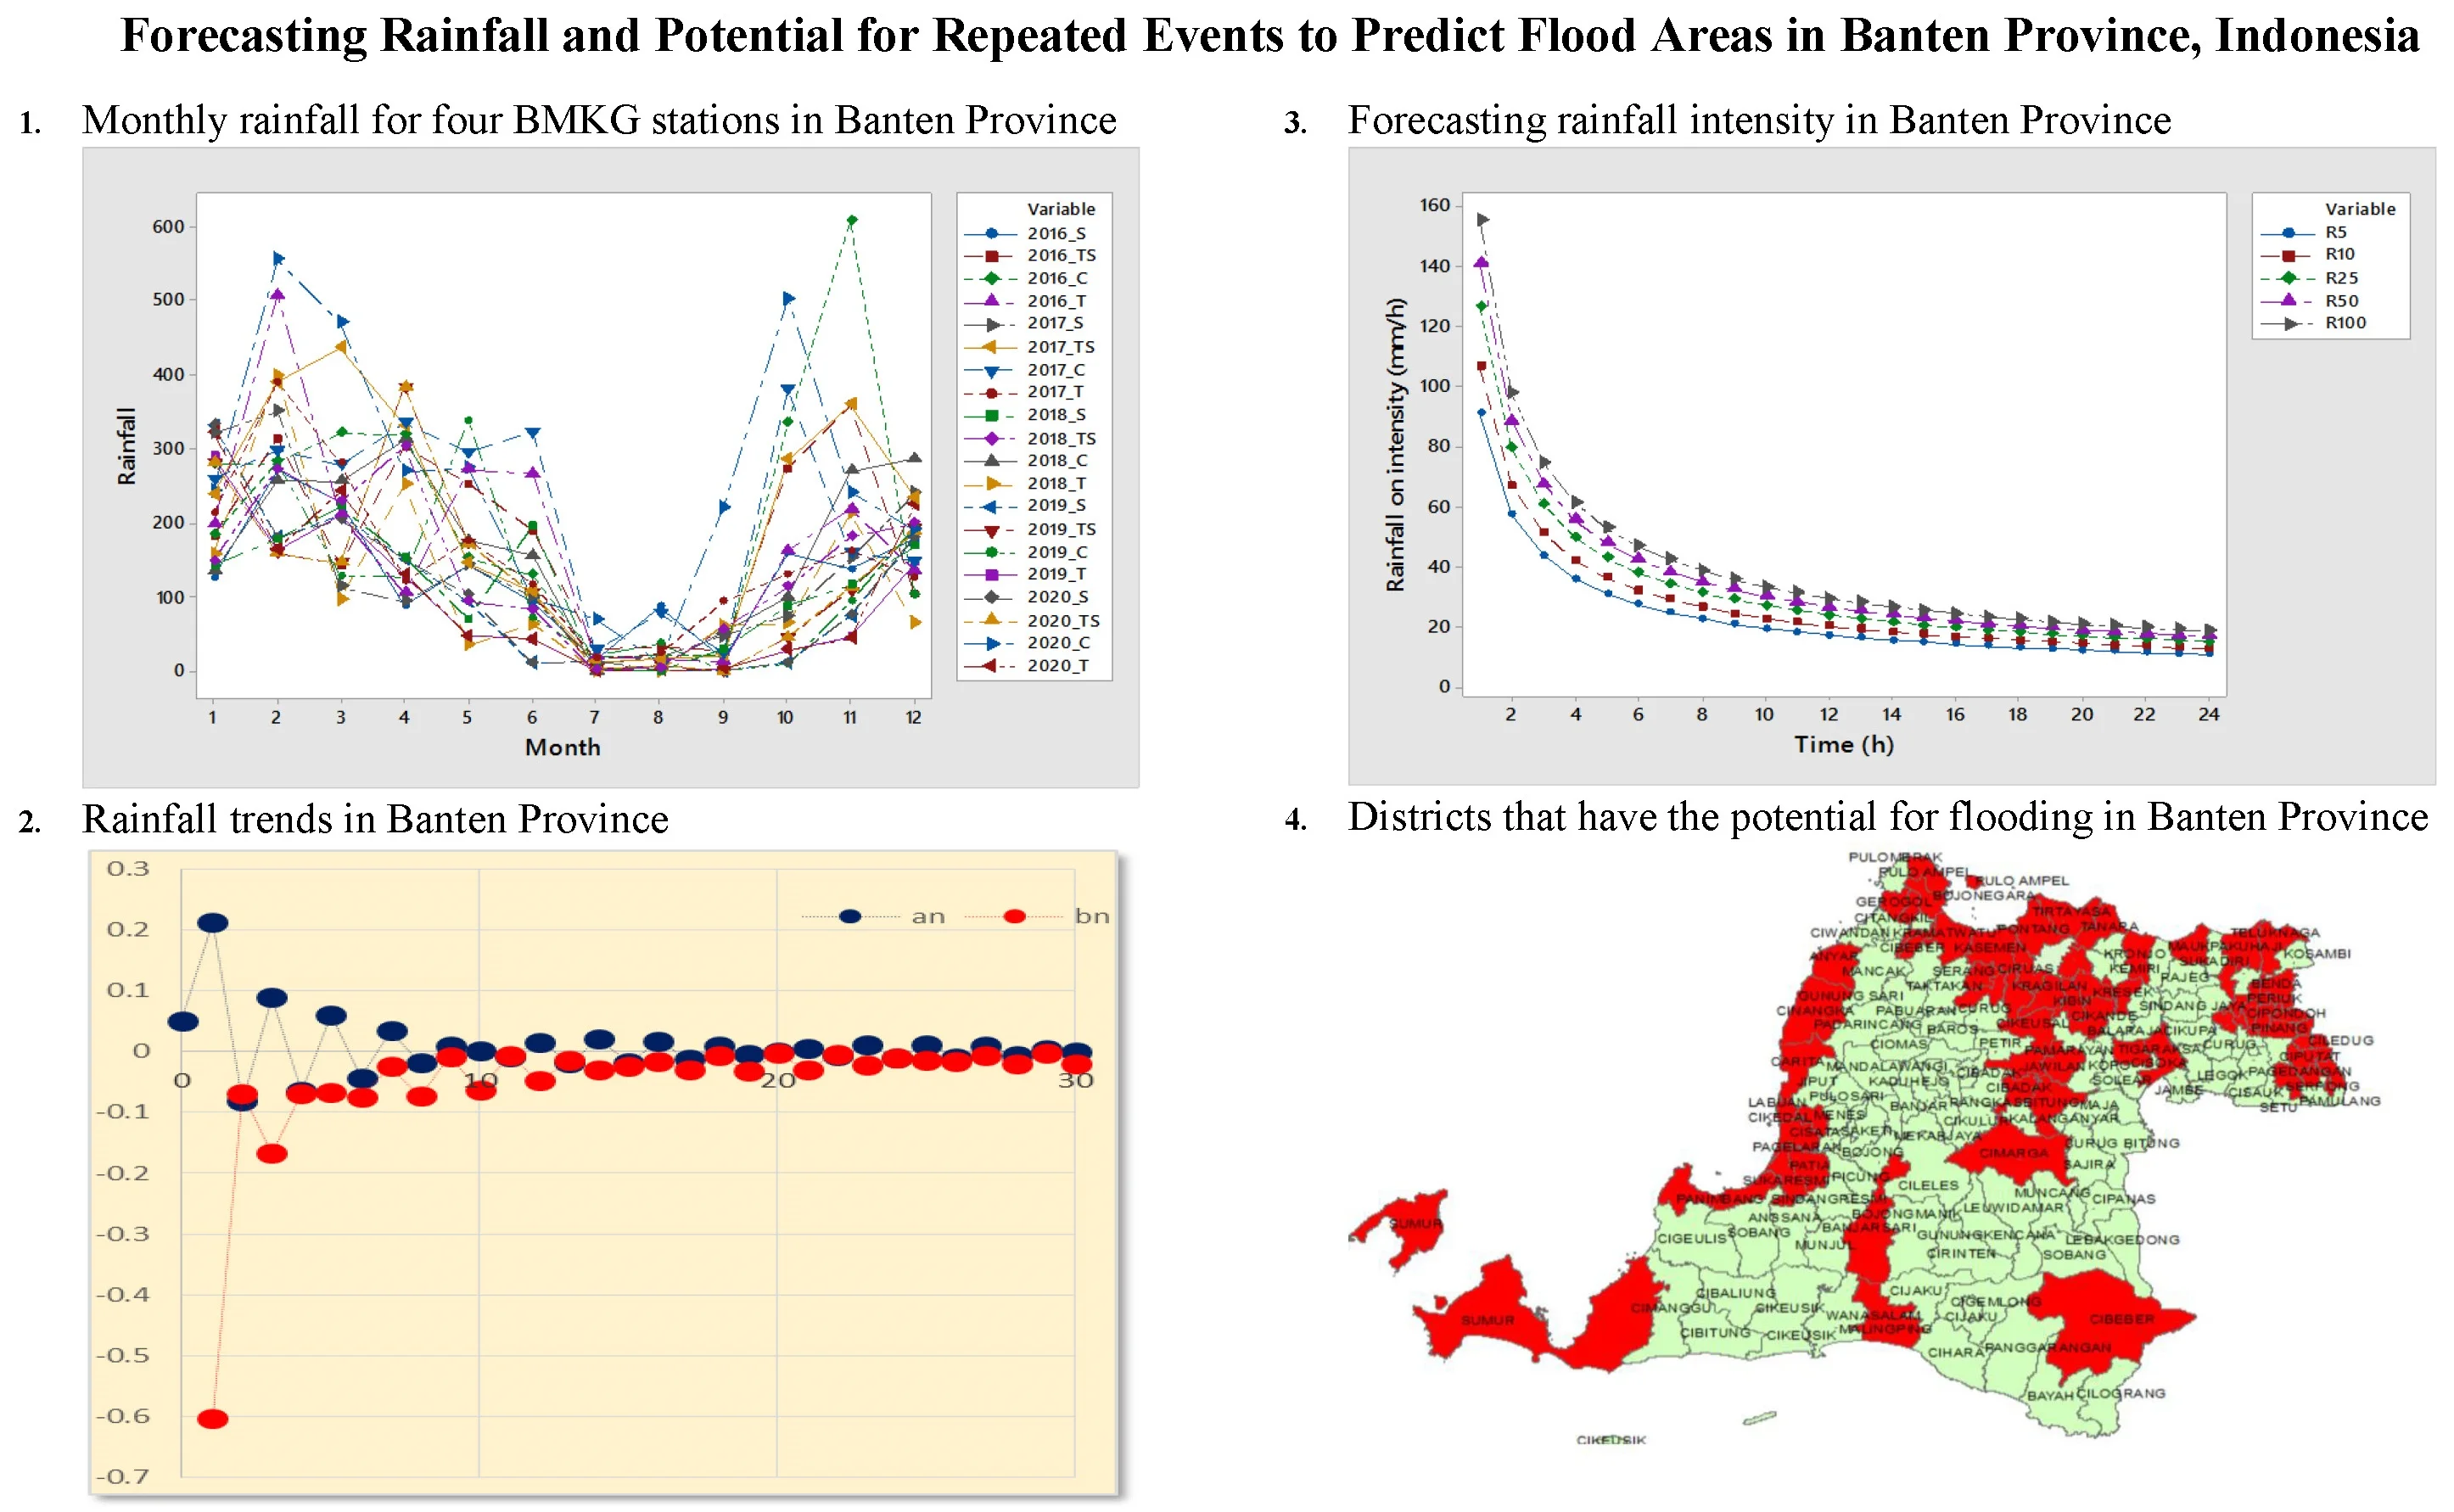 Forecasting rainfall and potential for repeated events to predict flood areas in Banten province, Indonesia